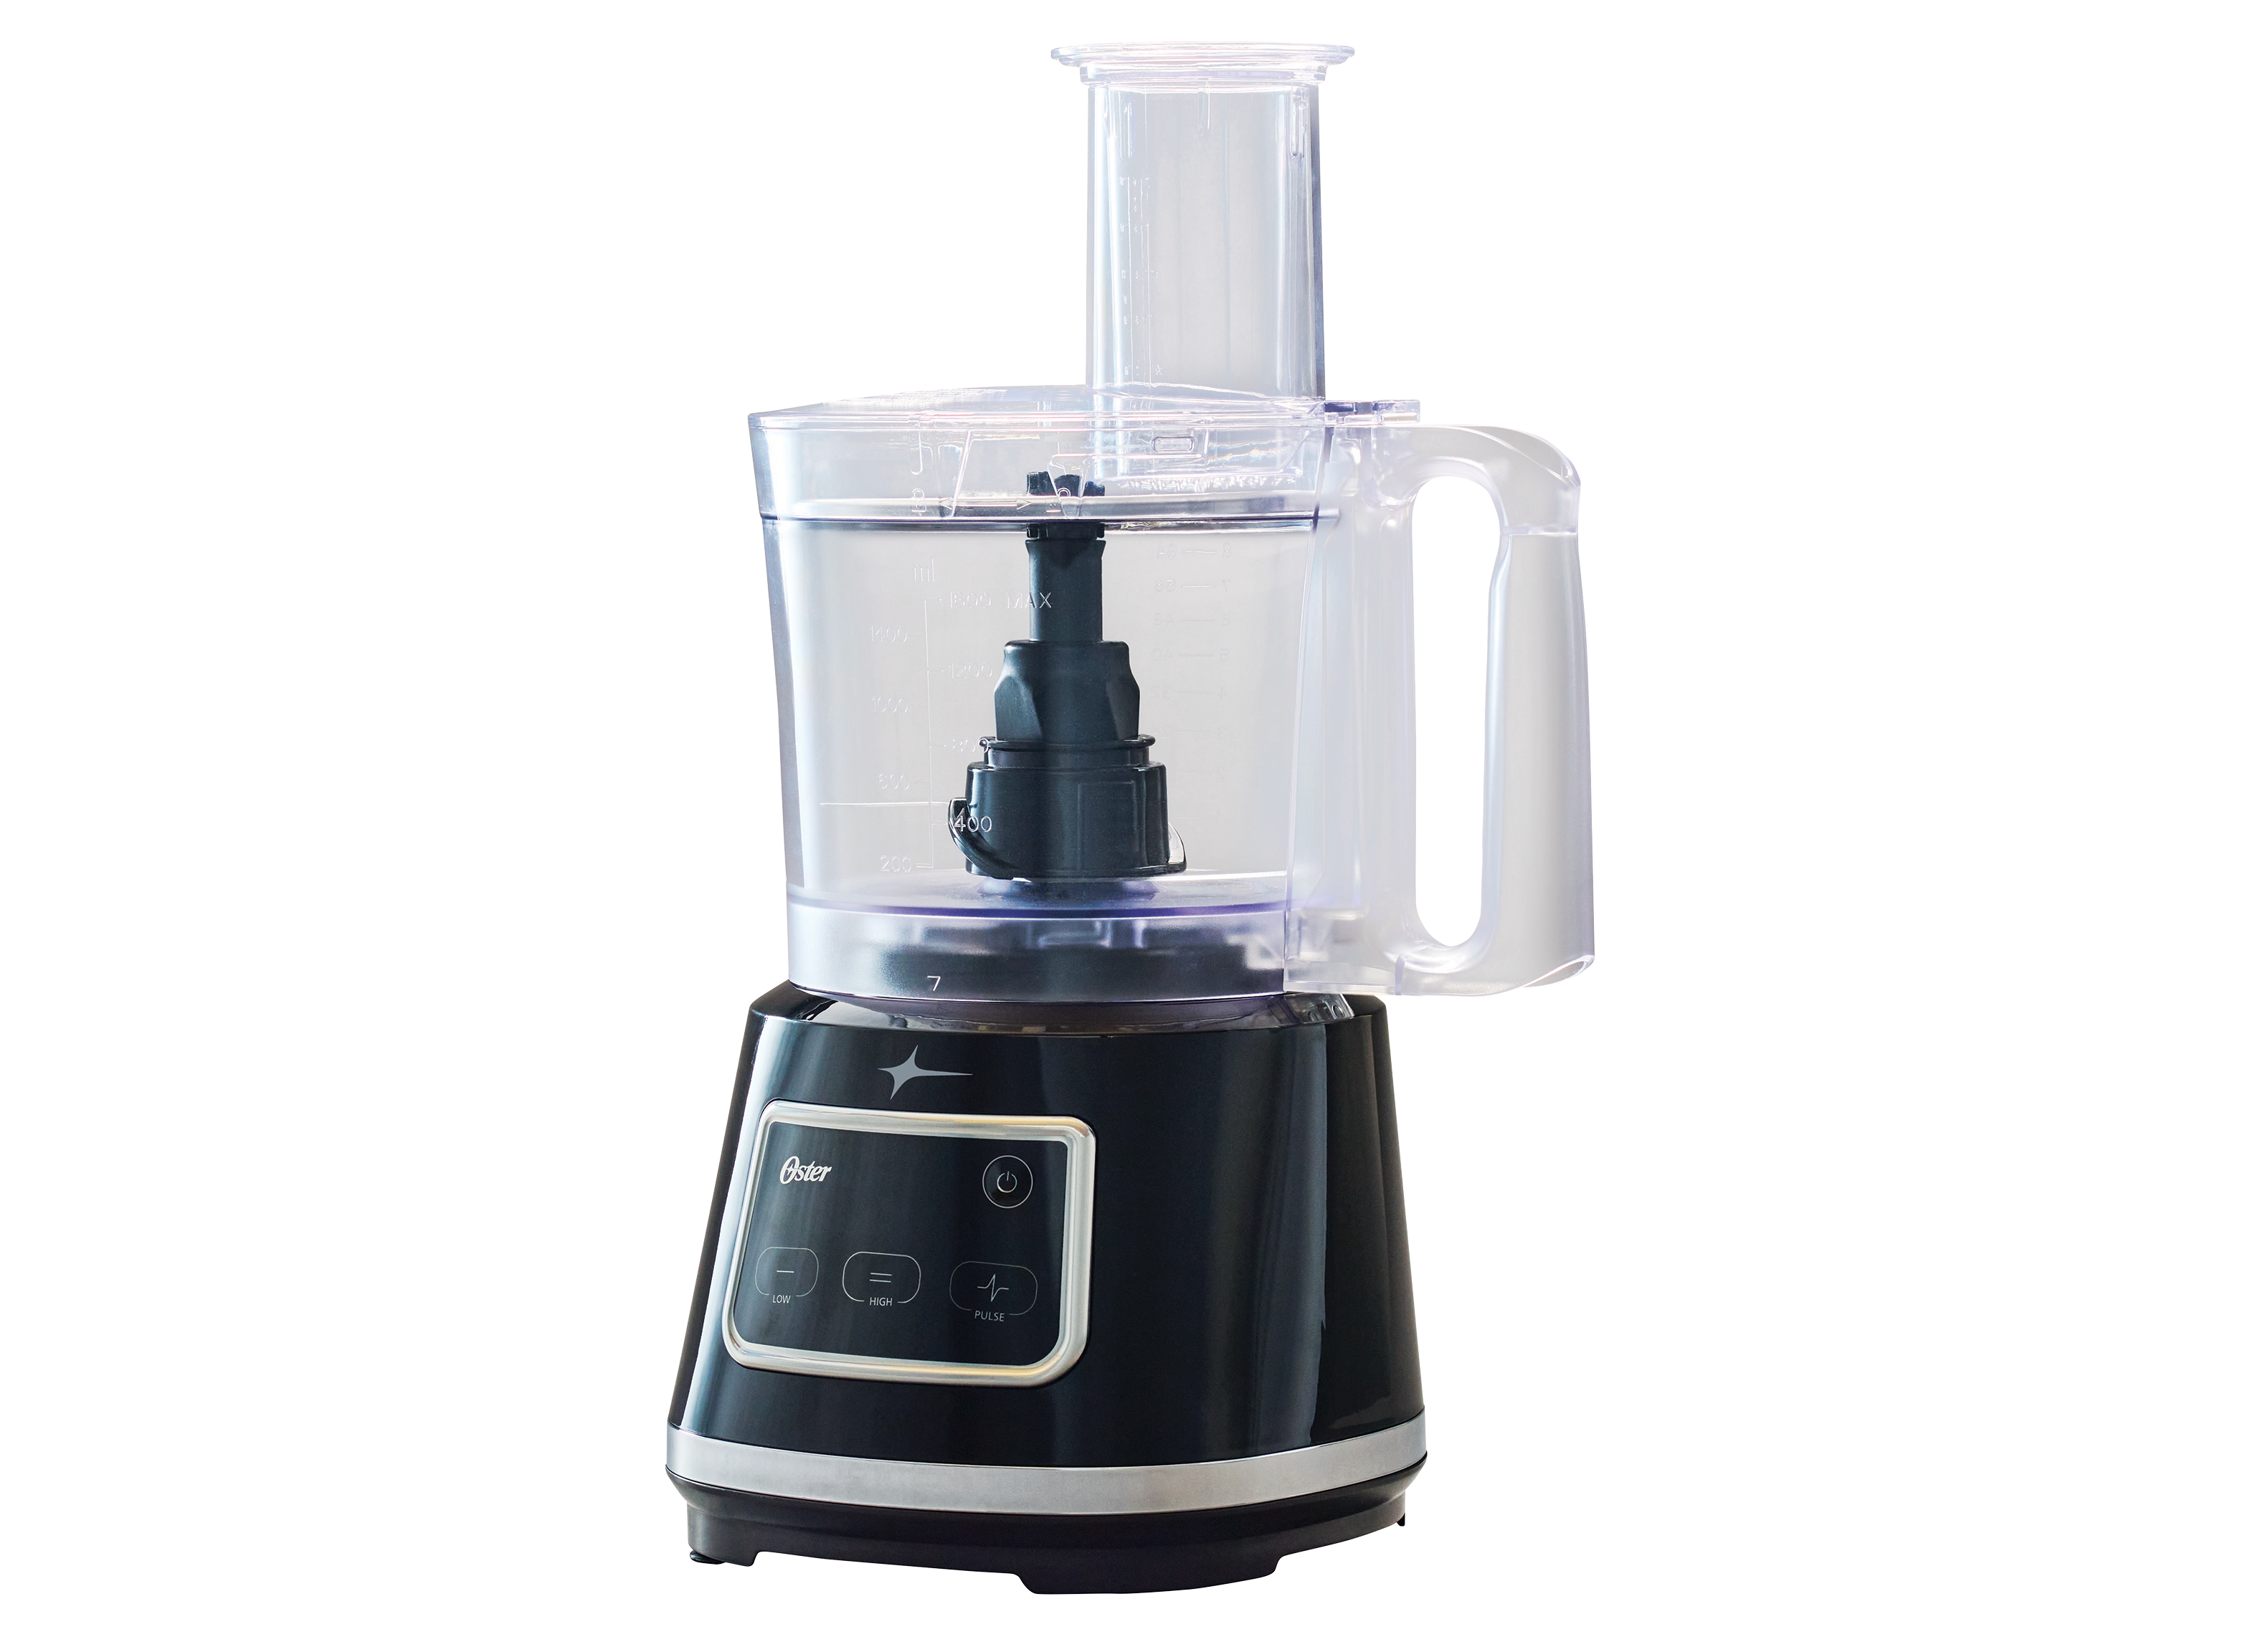 https://crdms.images.consumerreports.org/prod/products/cr/models/405217-food-processors-oster-10-cup-with-easy-touch-technology-fpstfpmp-ts-10024952.png